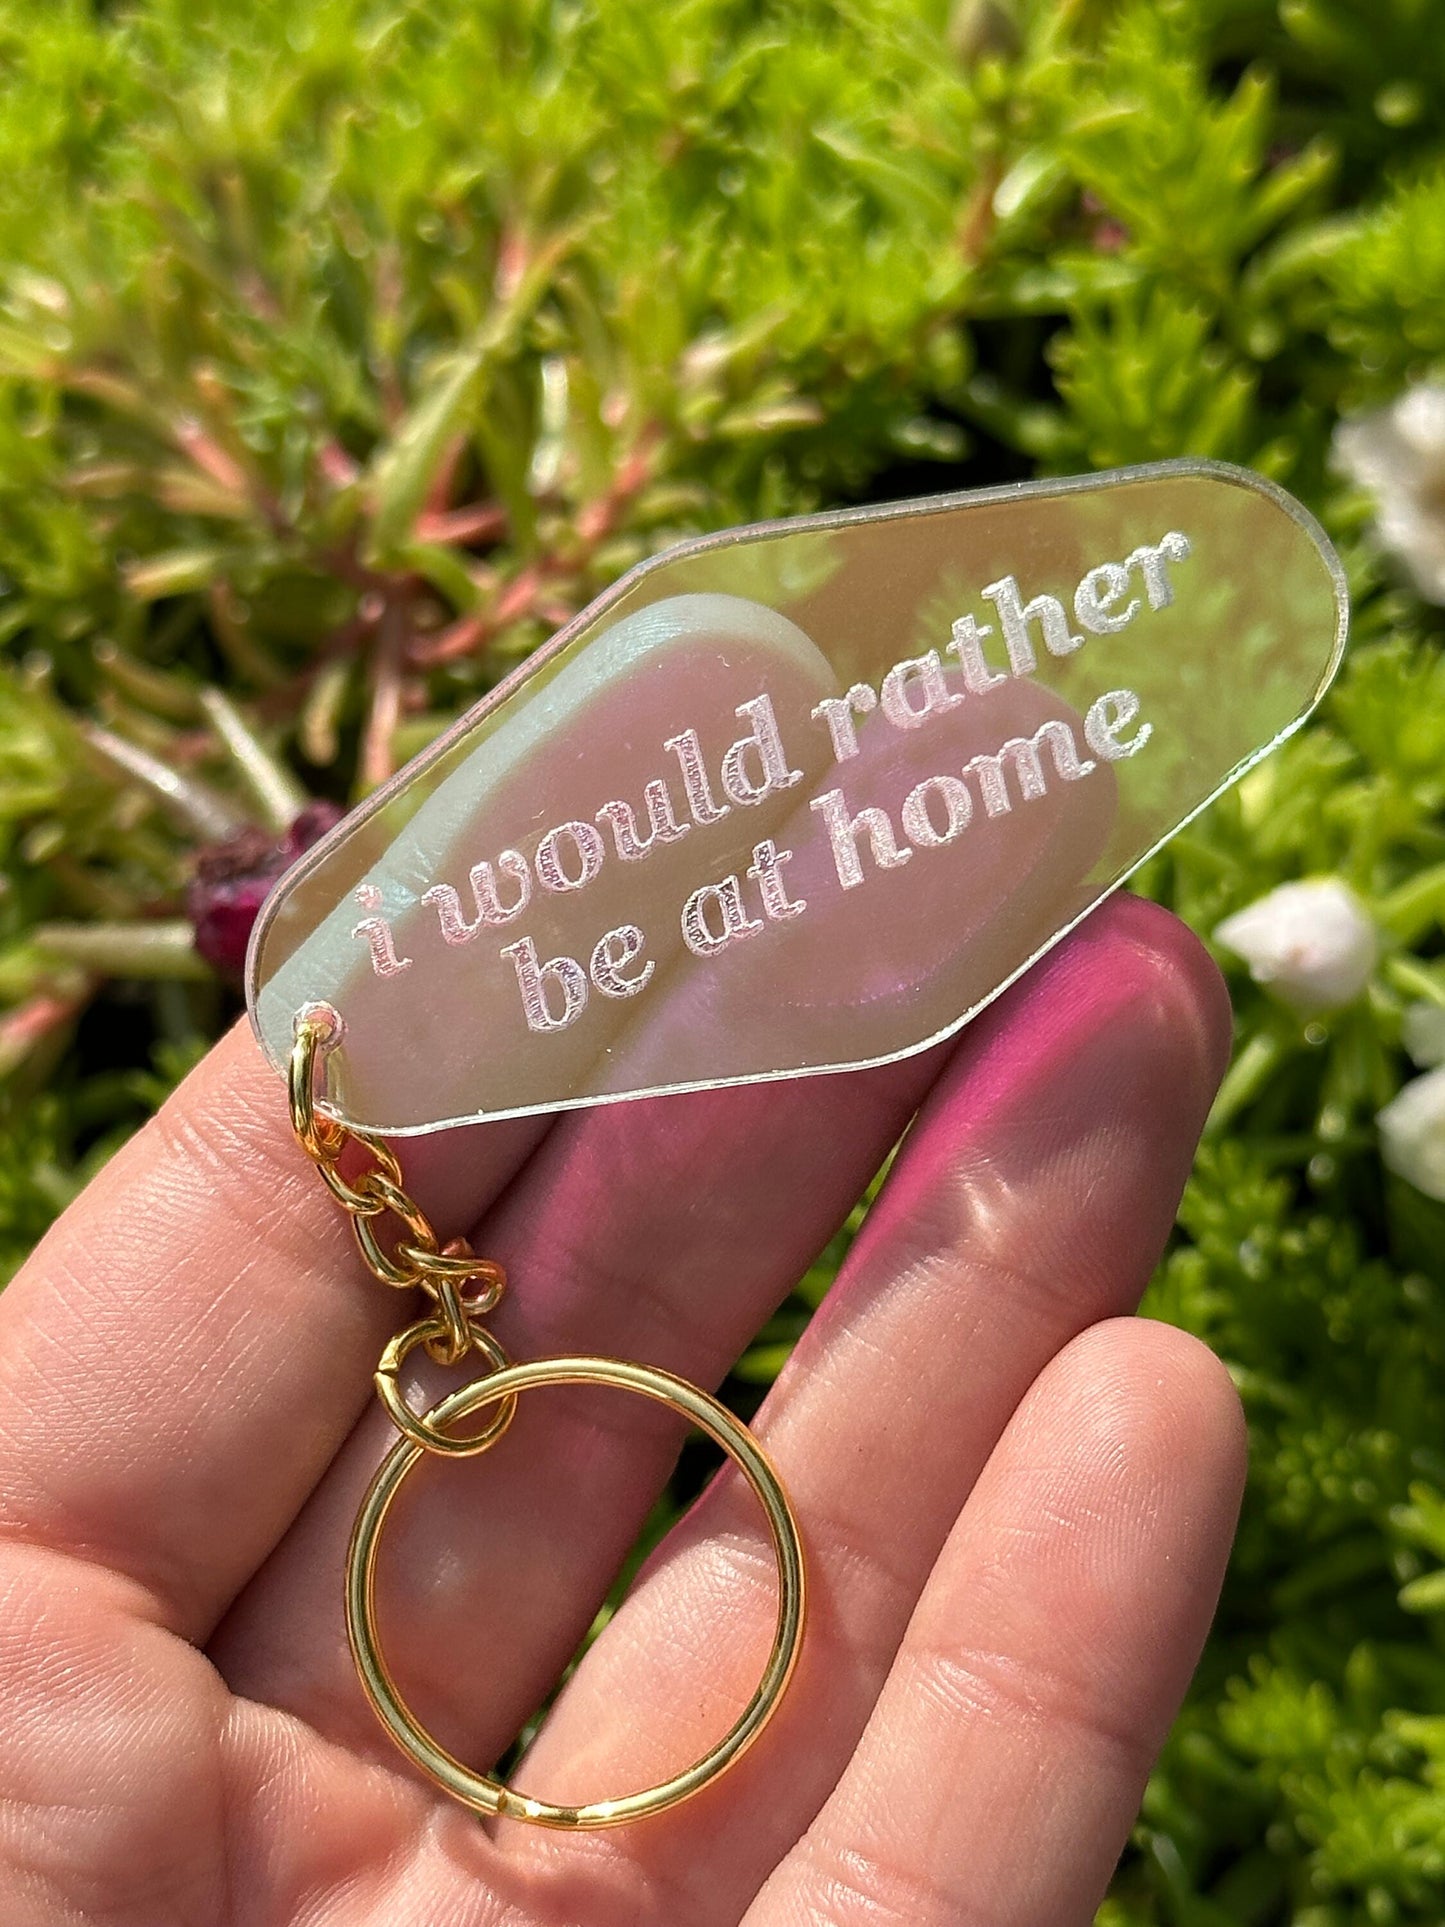 I would rather be at home Iridescent Acrylic Motel Keychain